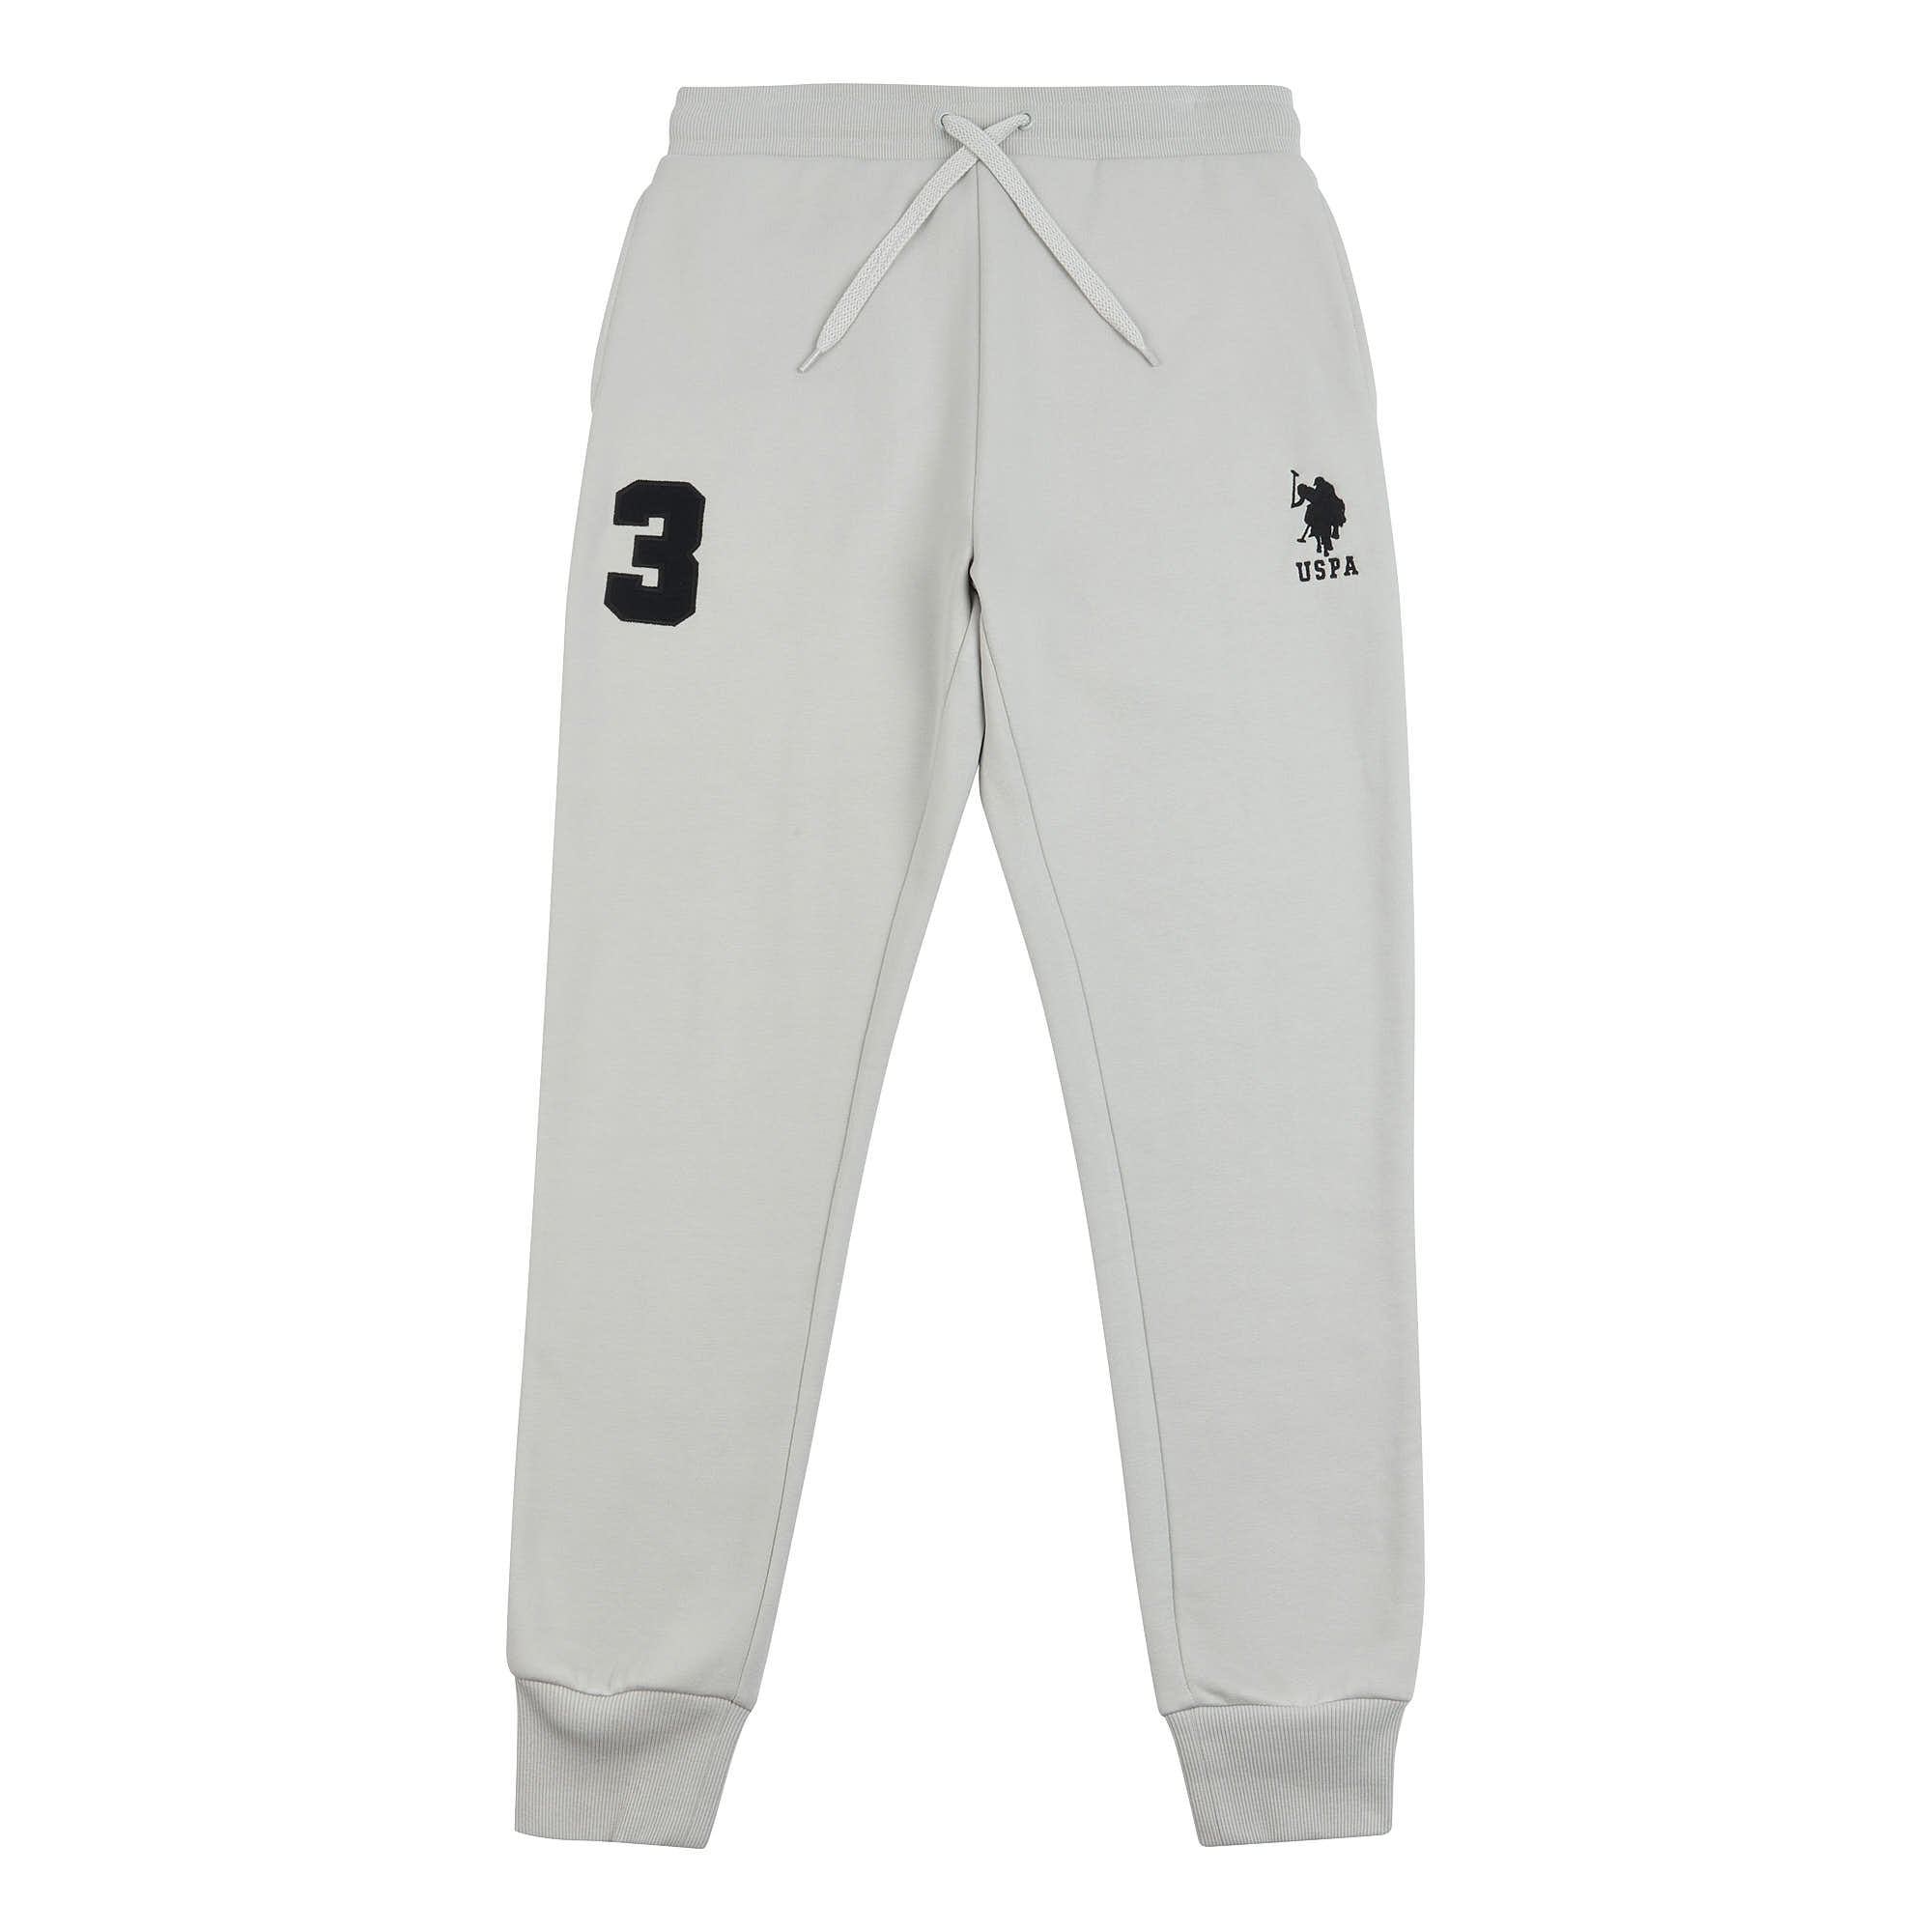 Mens Player 3 Joggers in High Rise